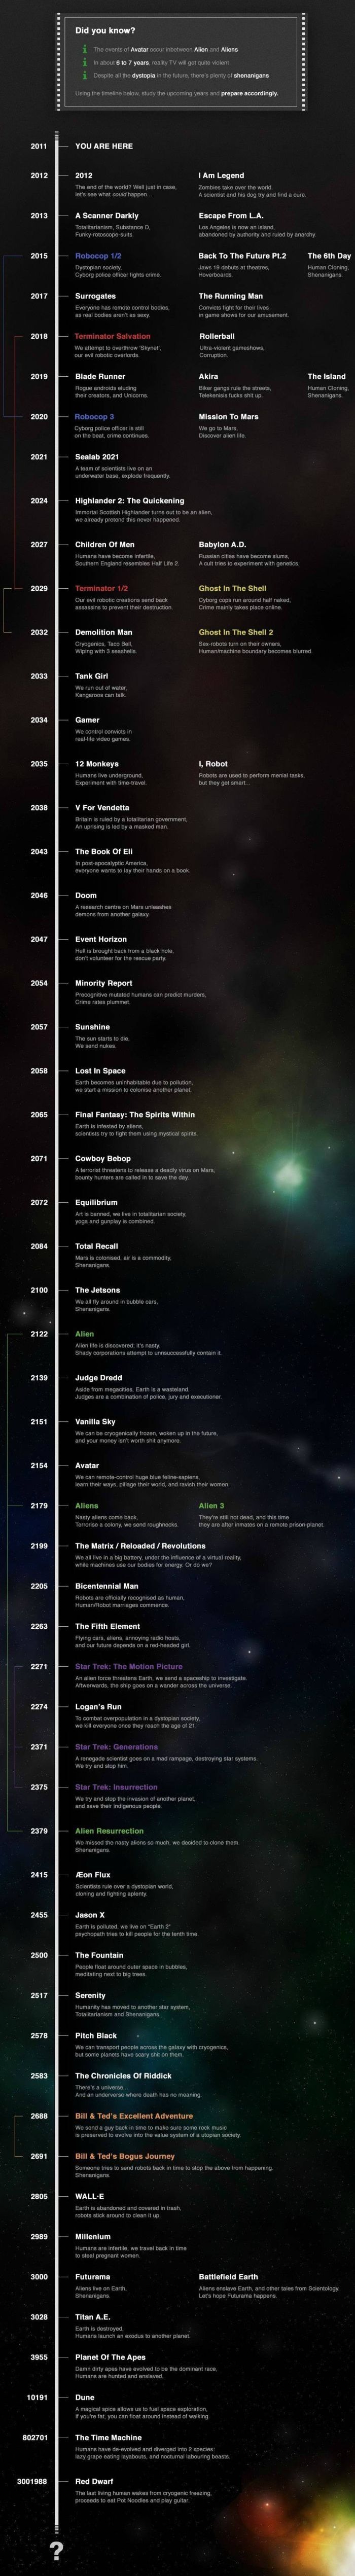 Our Future According to Films (infographic)